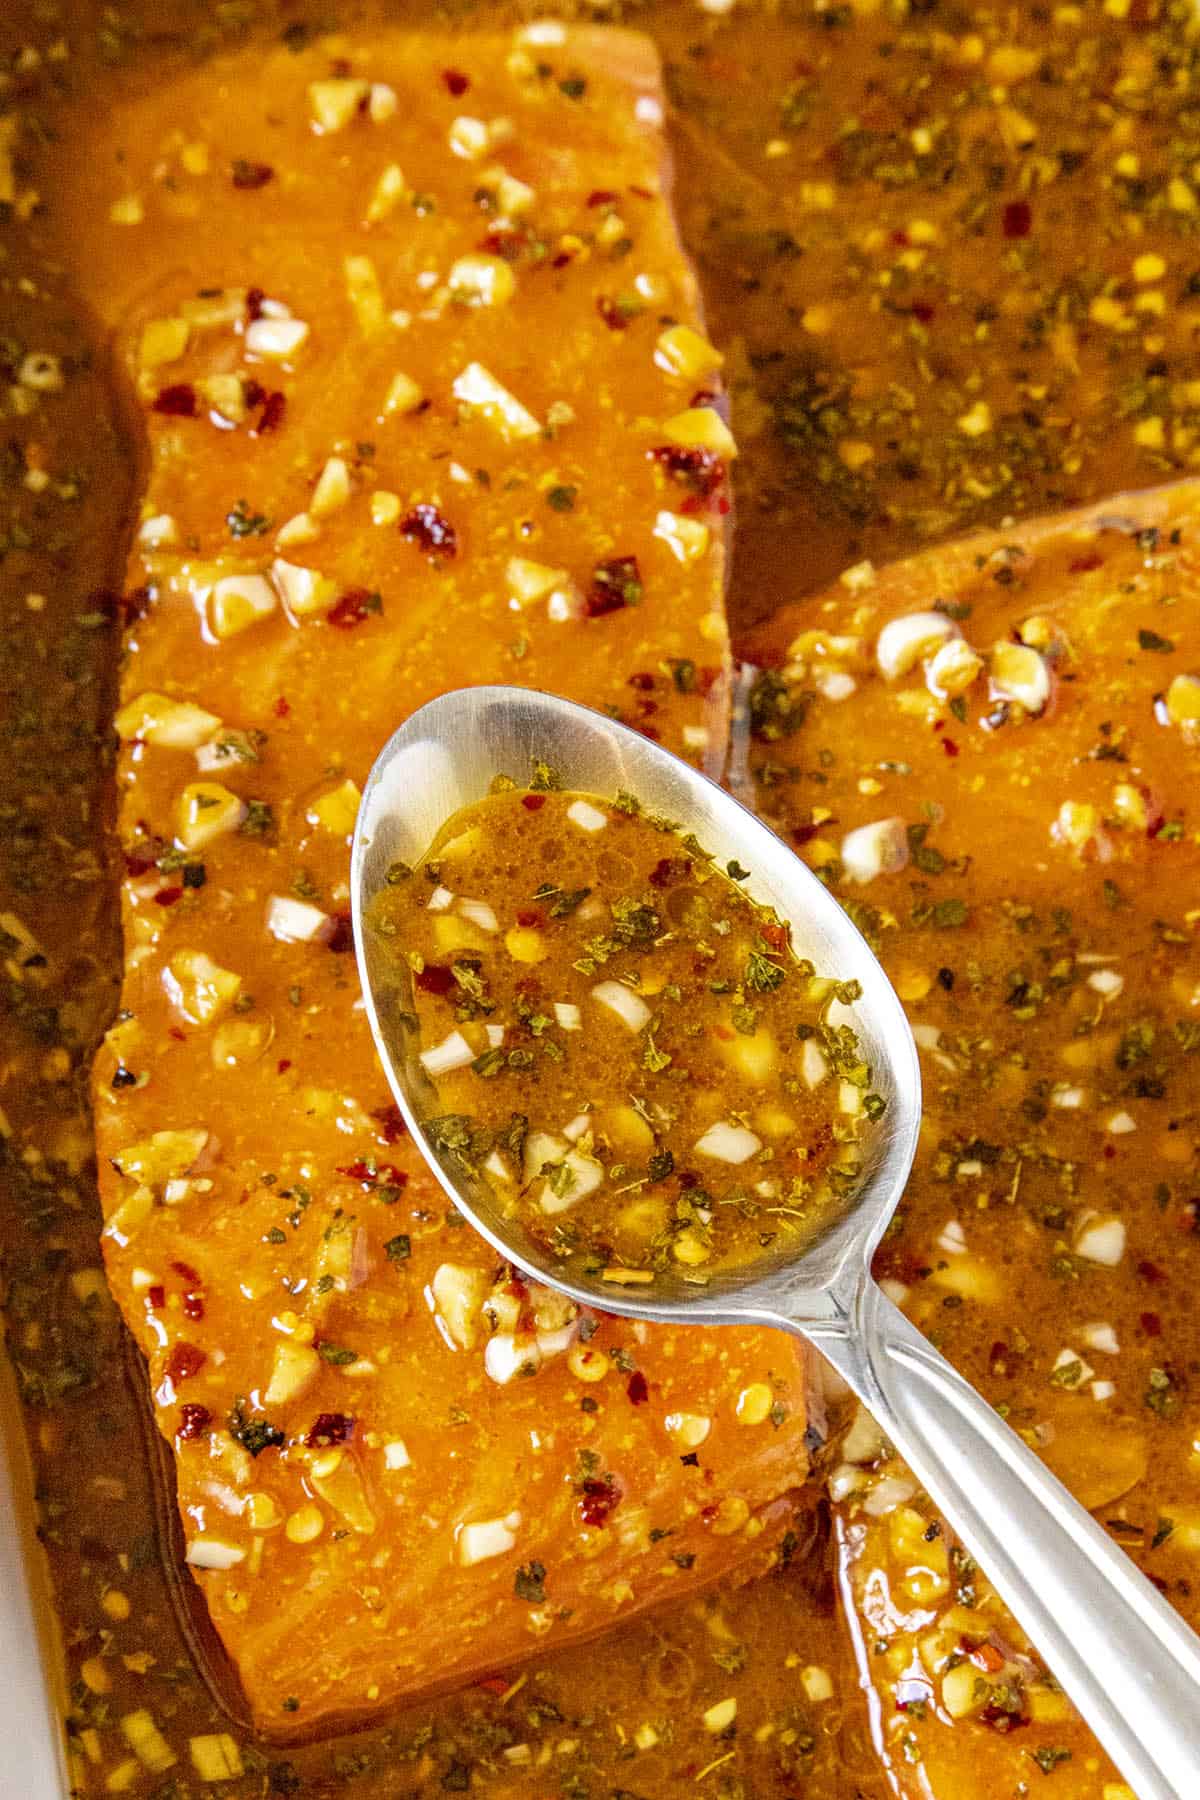 Spooning some spicy salmon marinade over salmon fillets